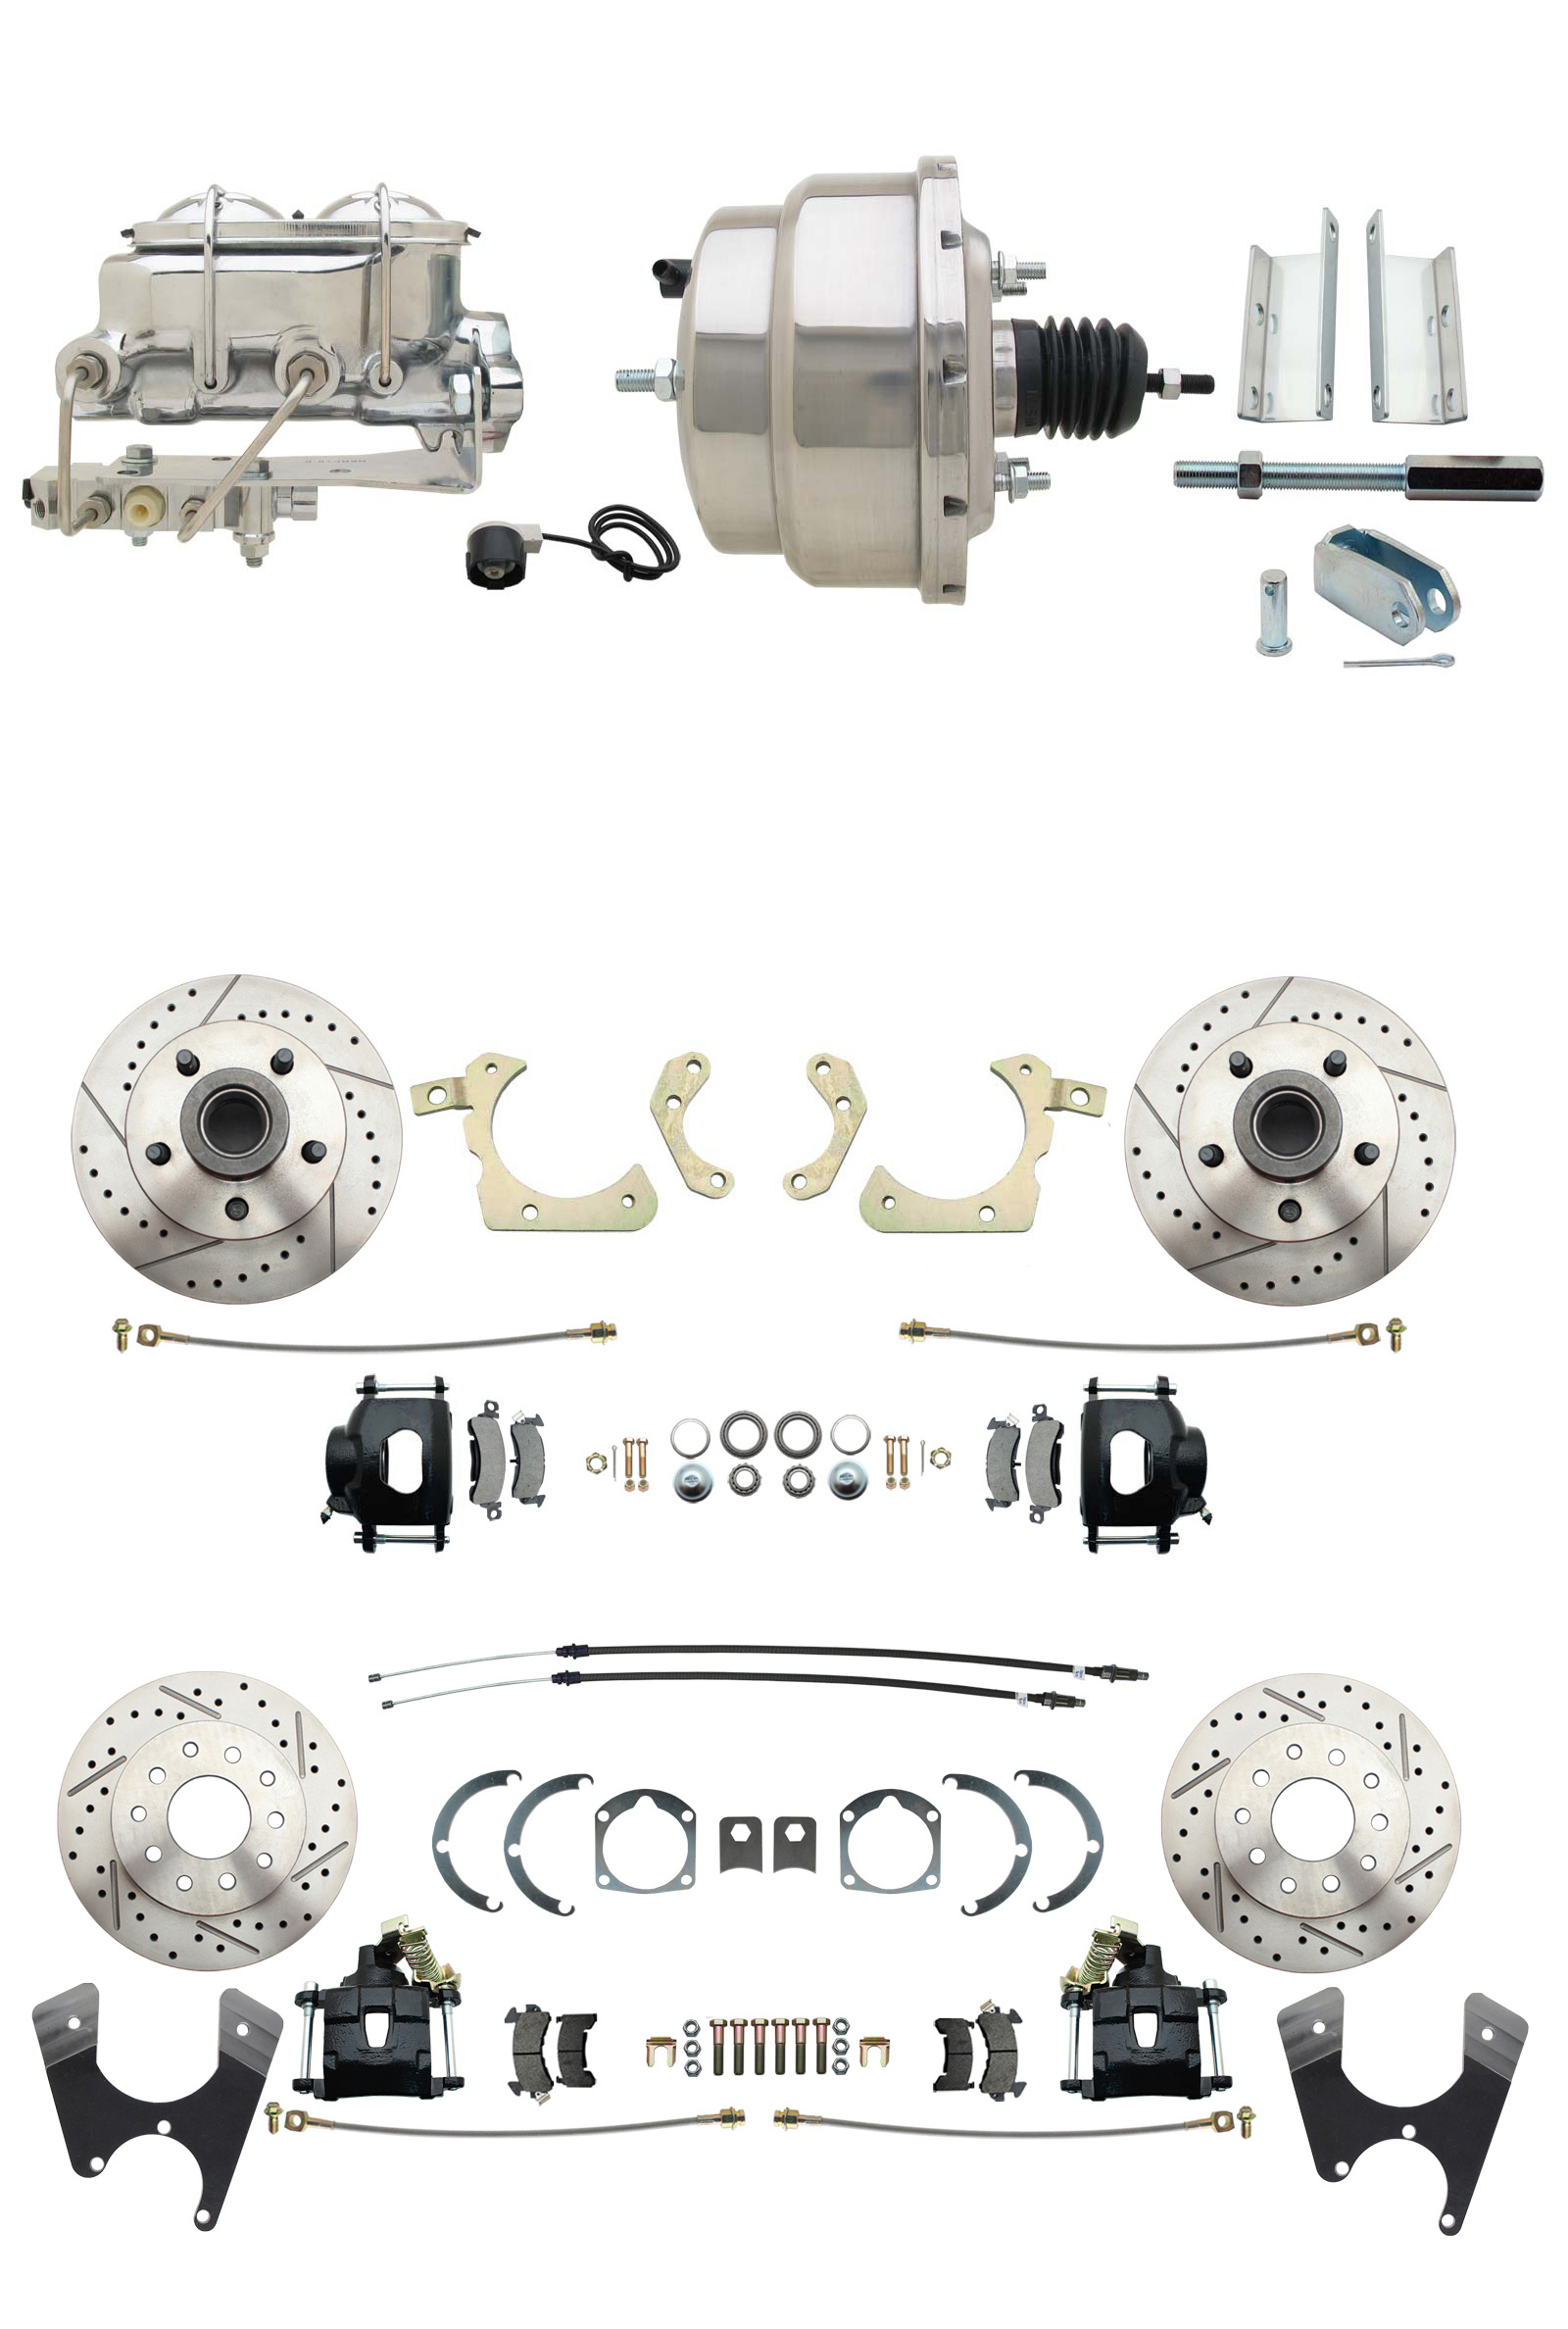 1955-1958 GM Full Size Front & Rear Power Disc Brake Kit Black Powder Coated Calipers Drilled/Slotted Rotors (Impala, Bel Air, Biscayne) & 8 Dual Chrome Booster Conversion Kit W/ Chrome Master Cylinder Bottom Mount Disc